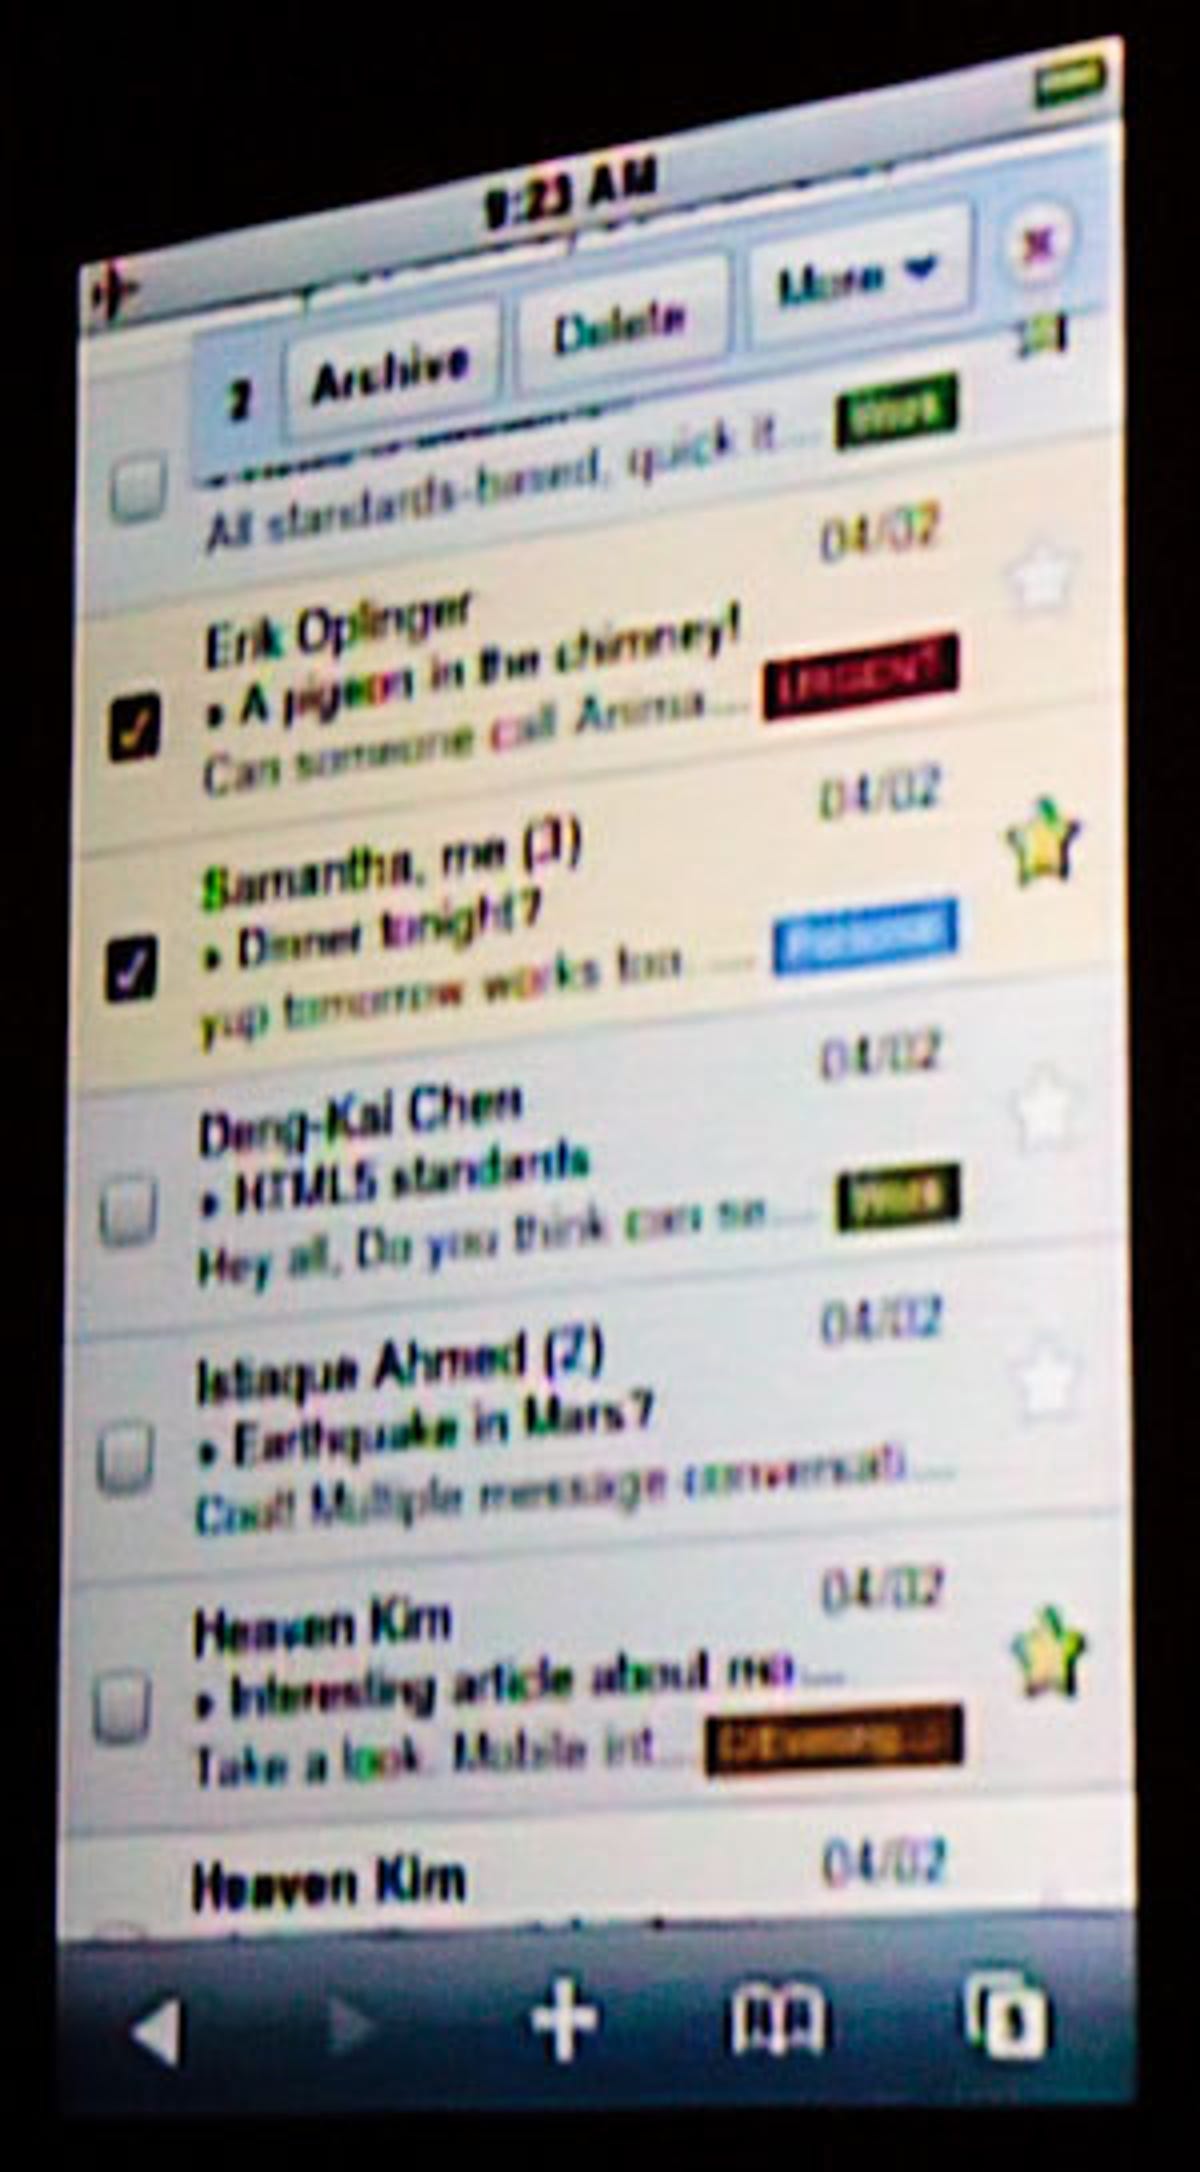 Gmail for iPhone Web app demo